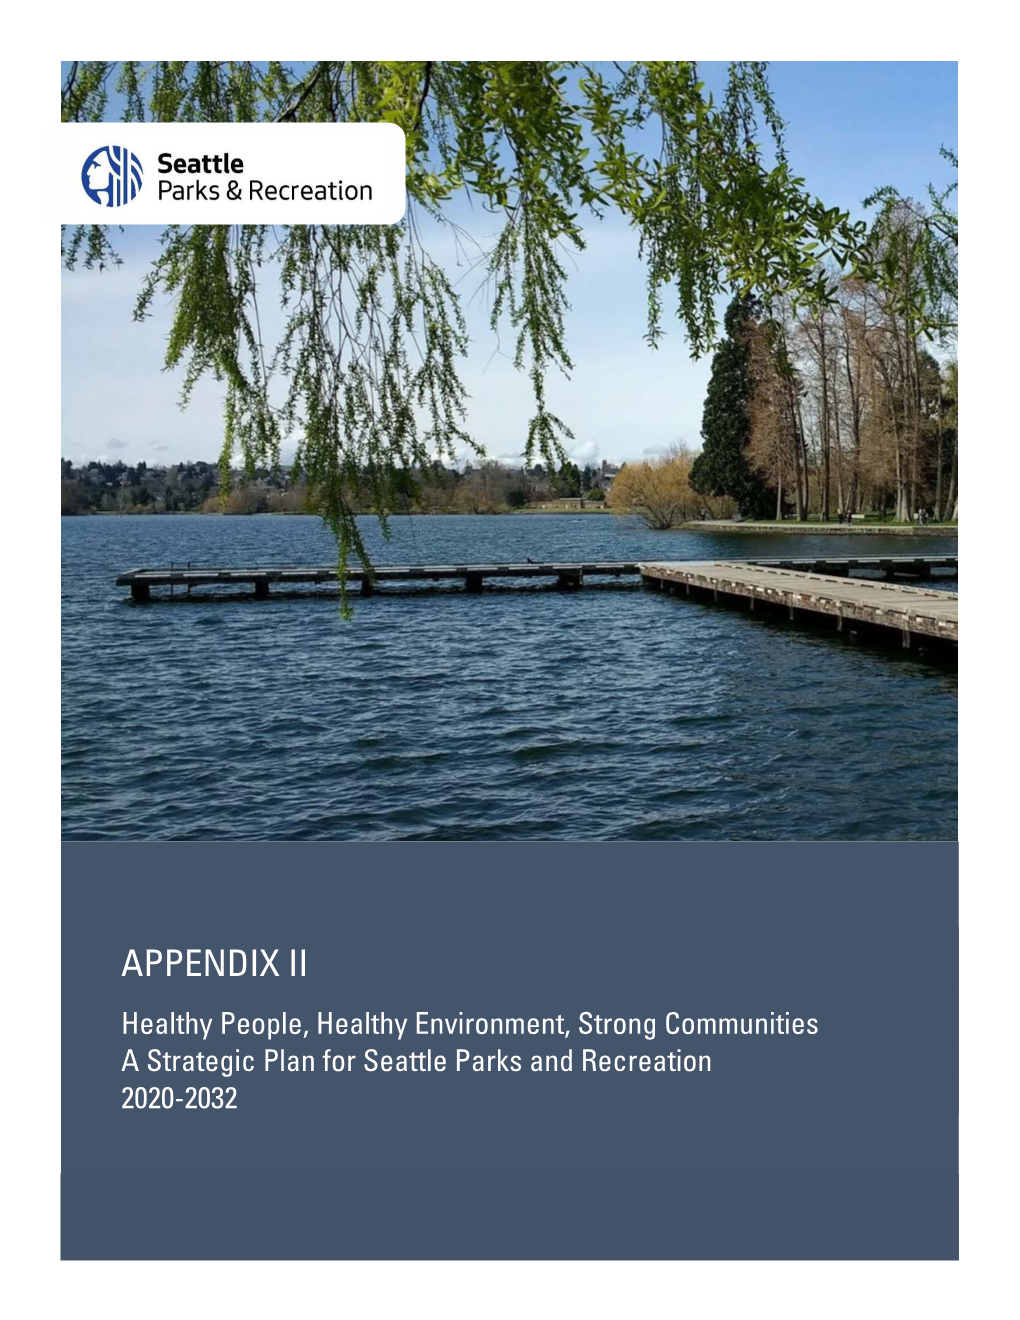 APPENDIX II Healthy People, Healthy Environment, Strong Communities a Strategic Plan for Seattle Parks and Recreation 2020-2032